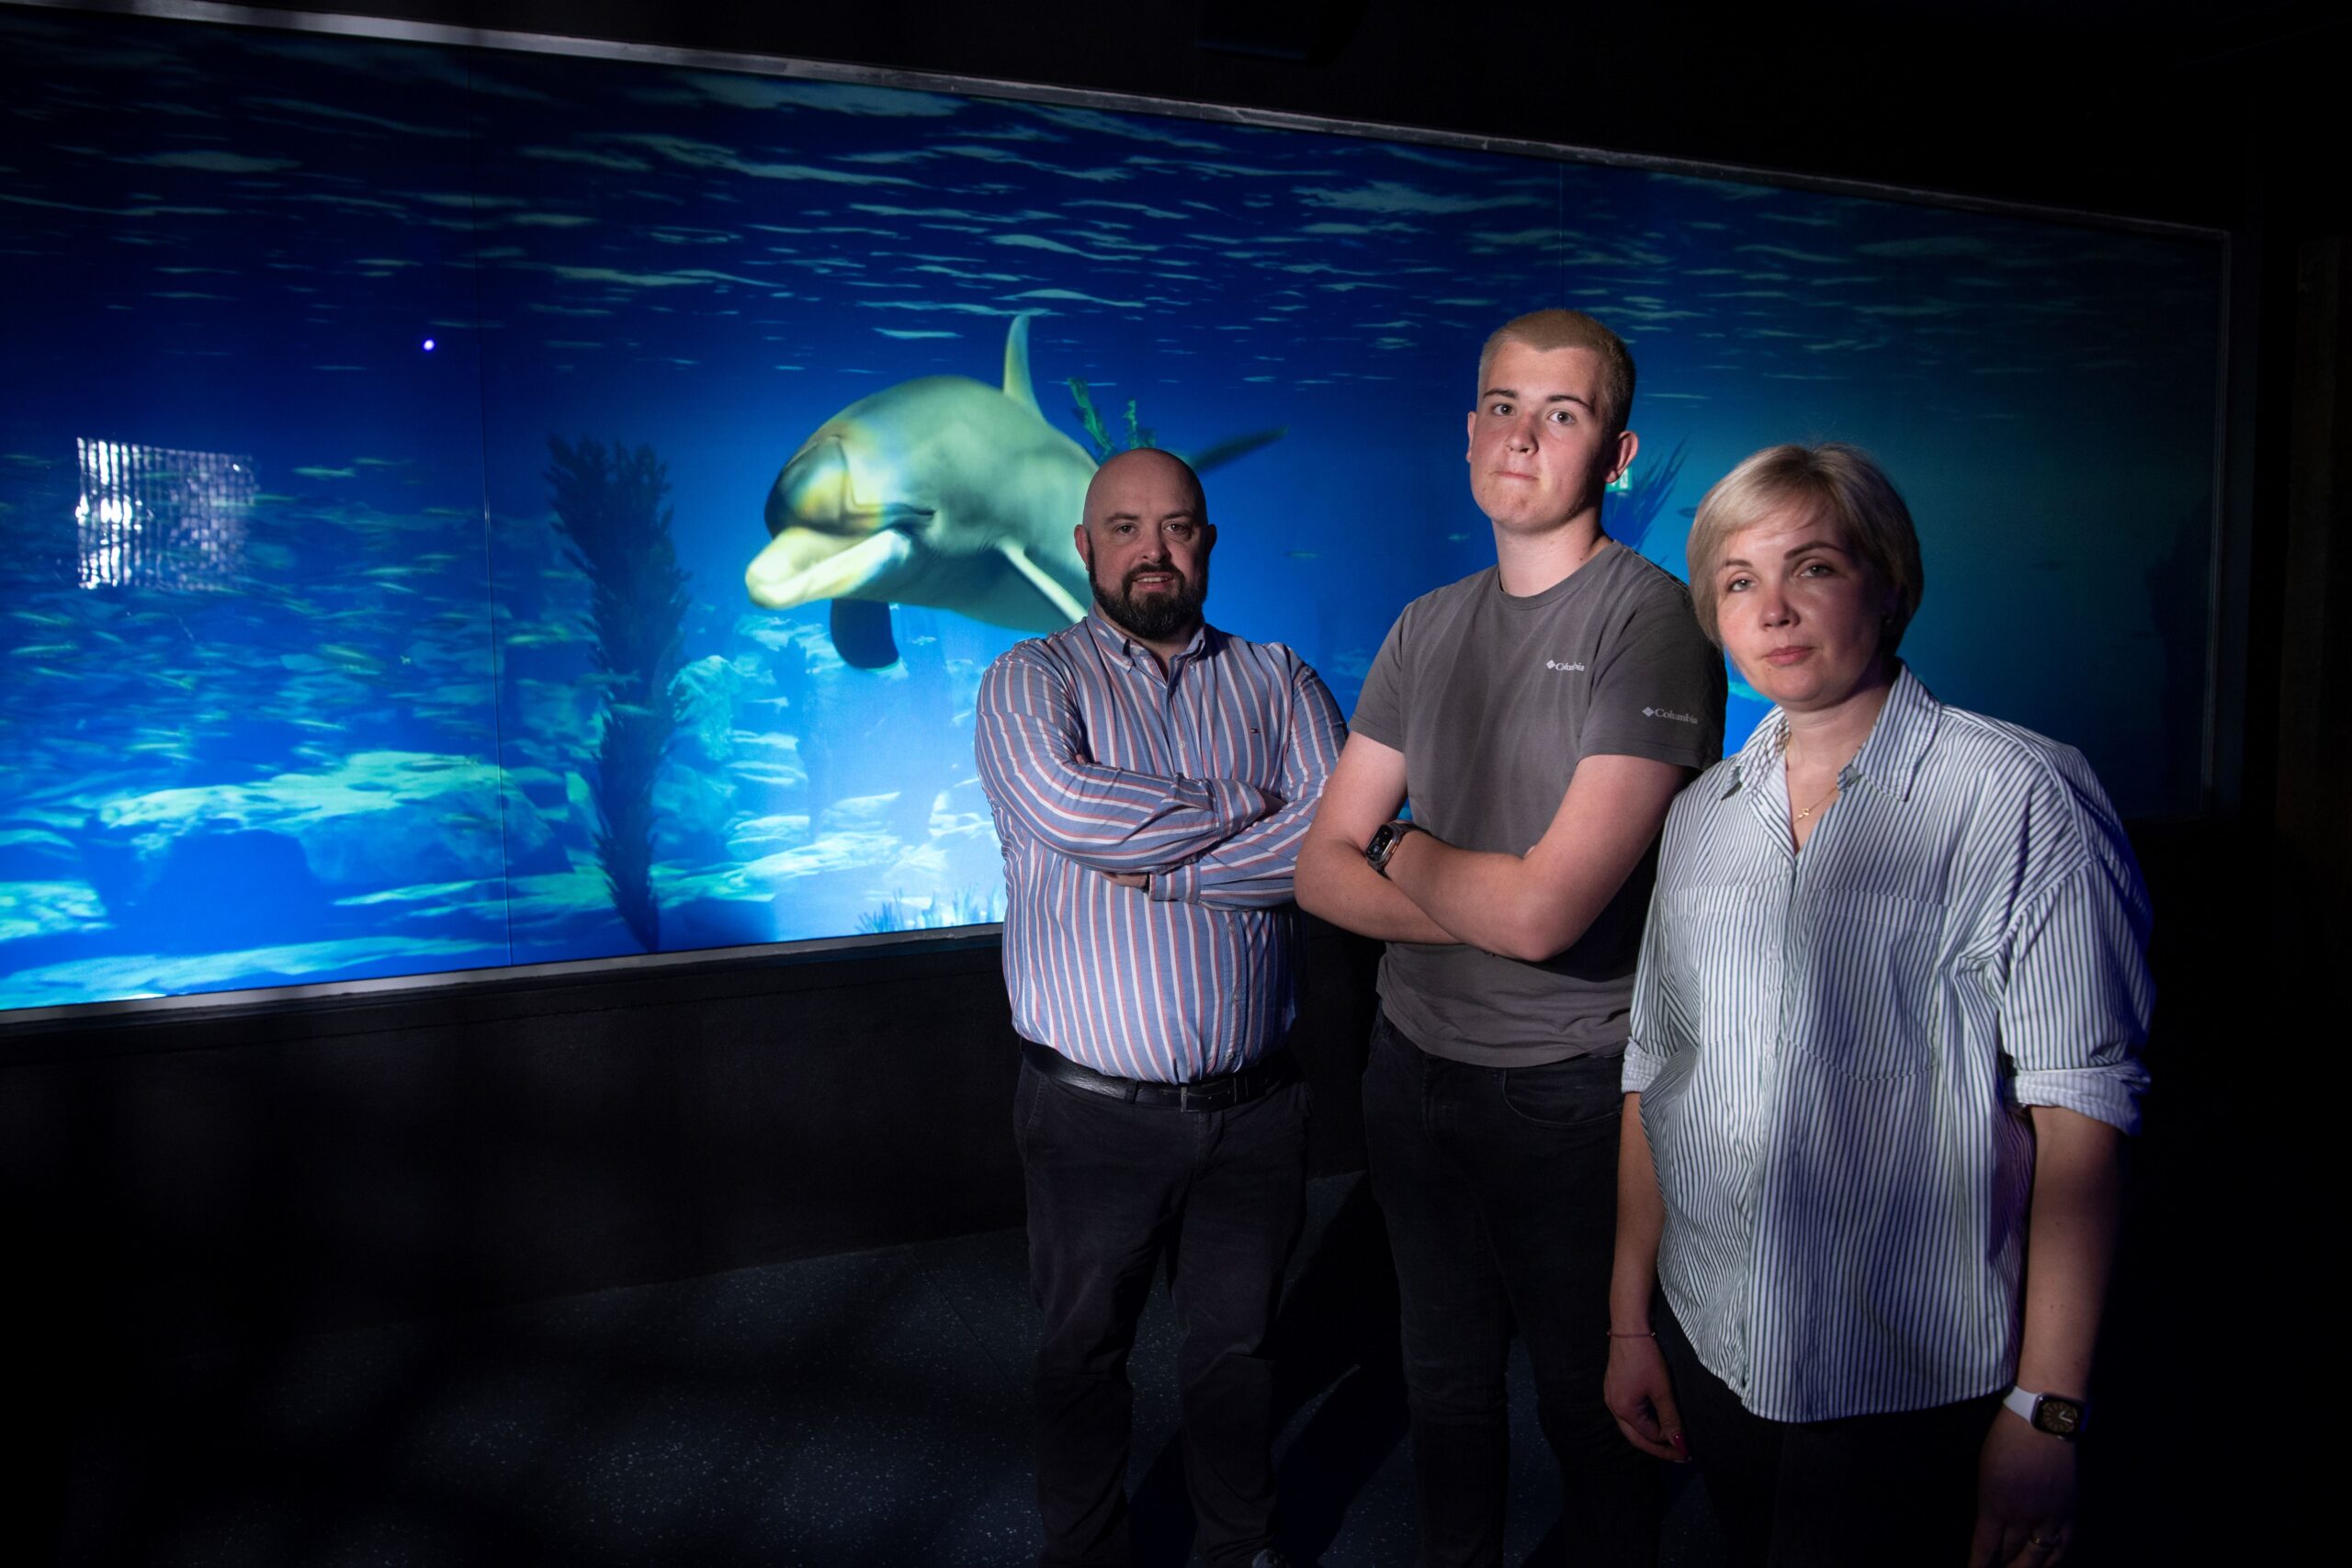 Renowned Dingle fish processor family making waves with exciting new digital visitor attraction